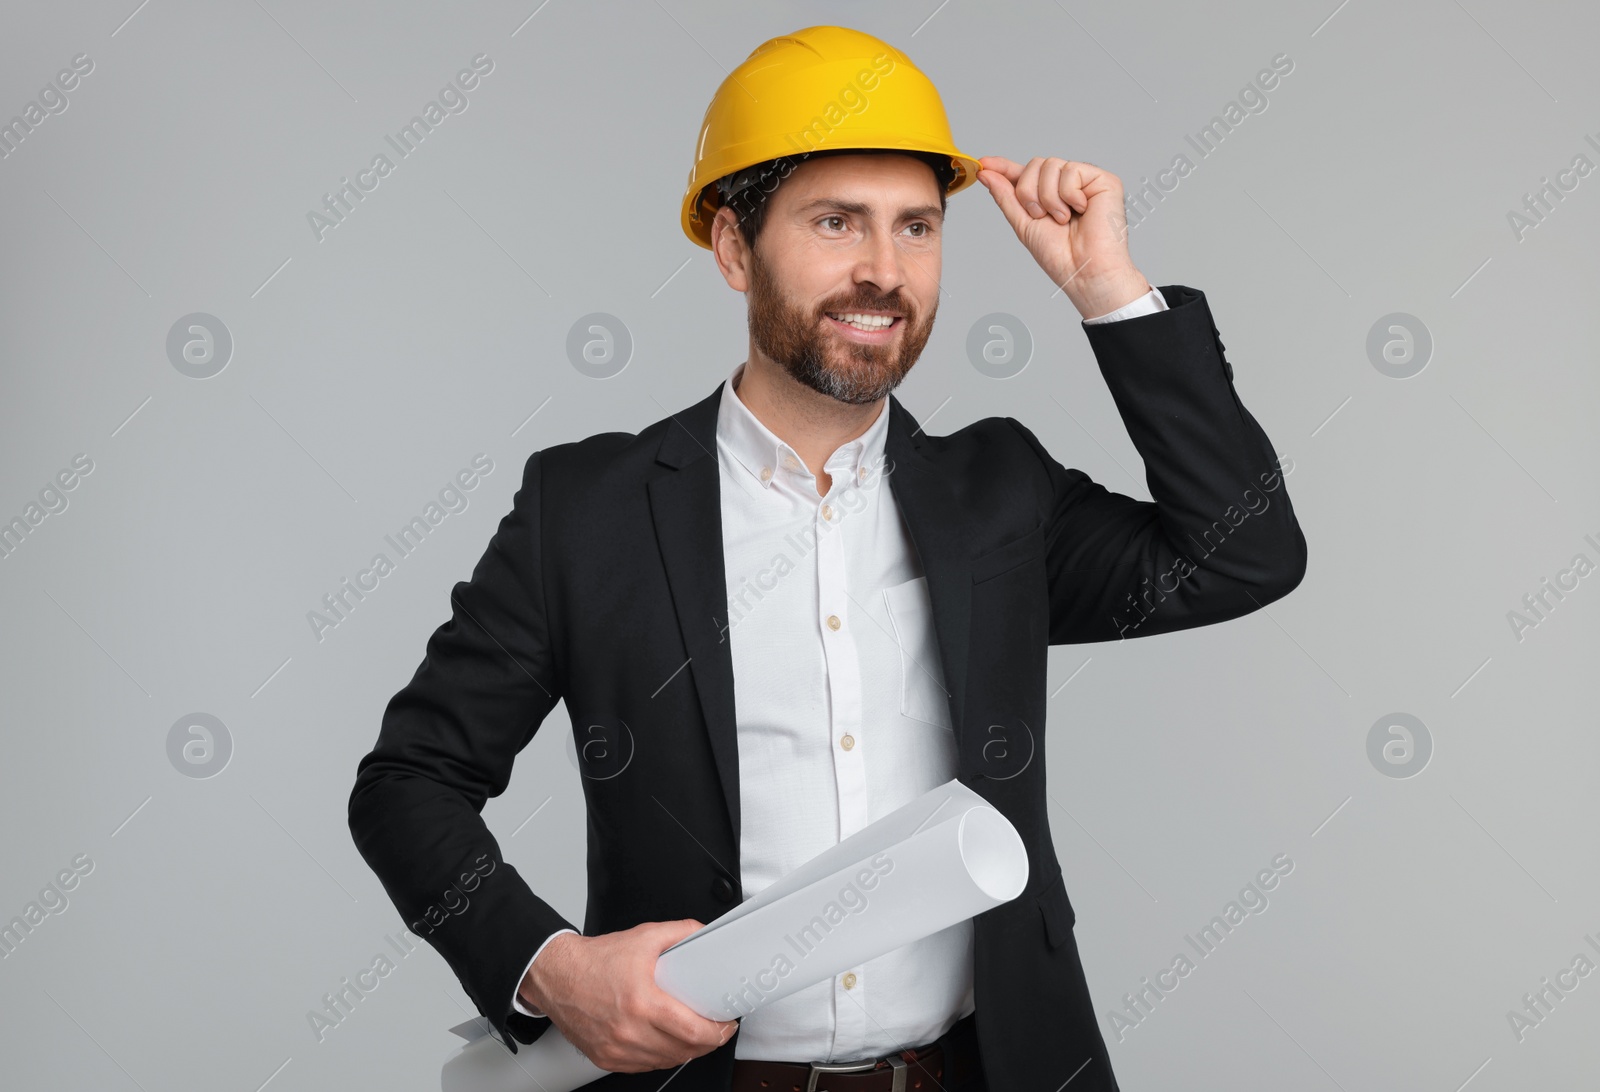 Photo of Architect in hard hat with draft on gray background